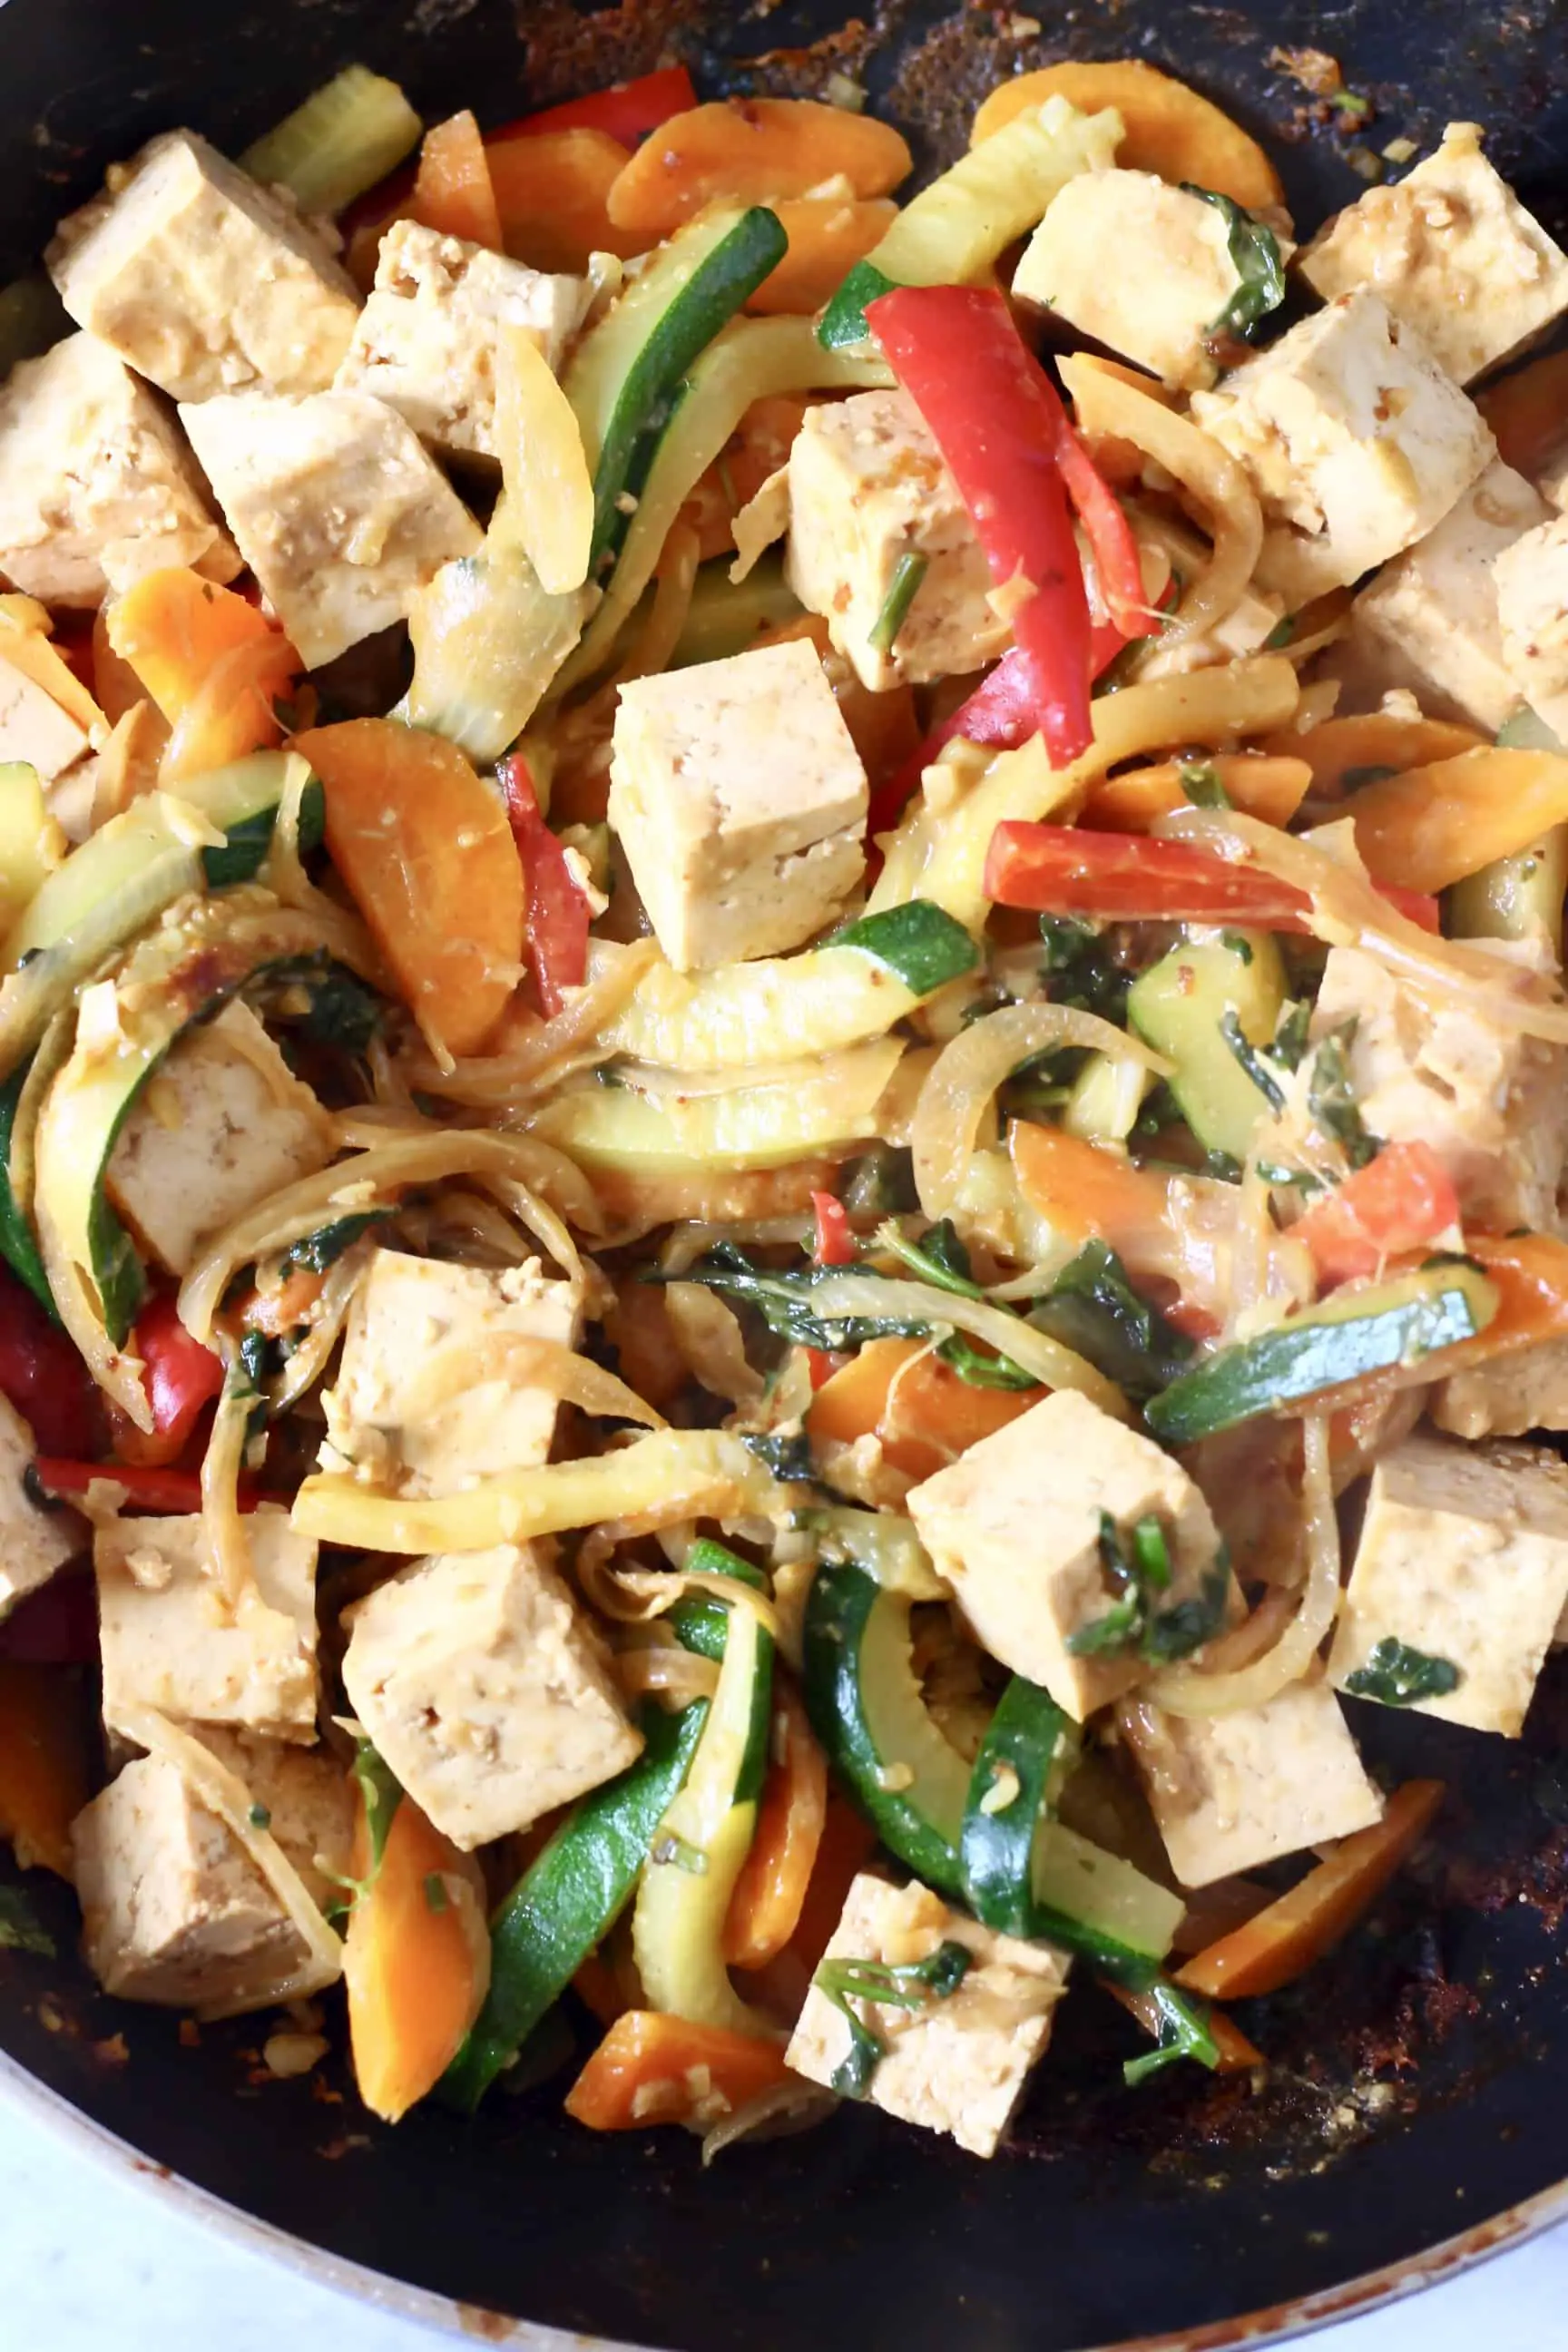 Chopped vegetables and tofu cubes in a frying pan